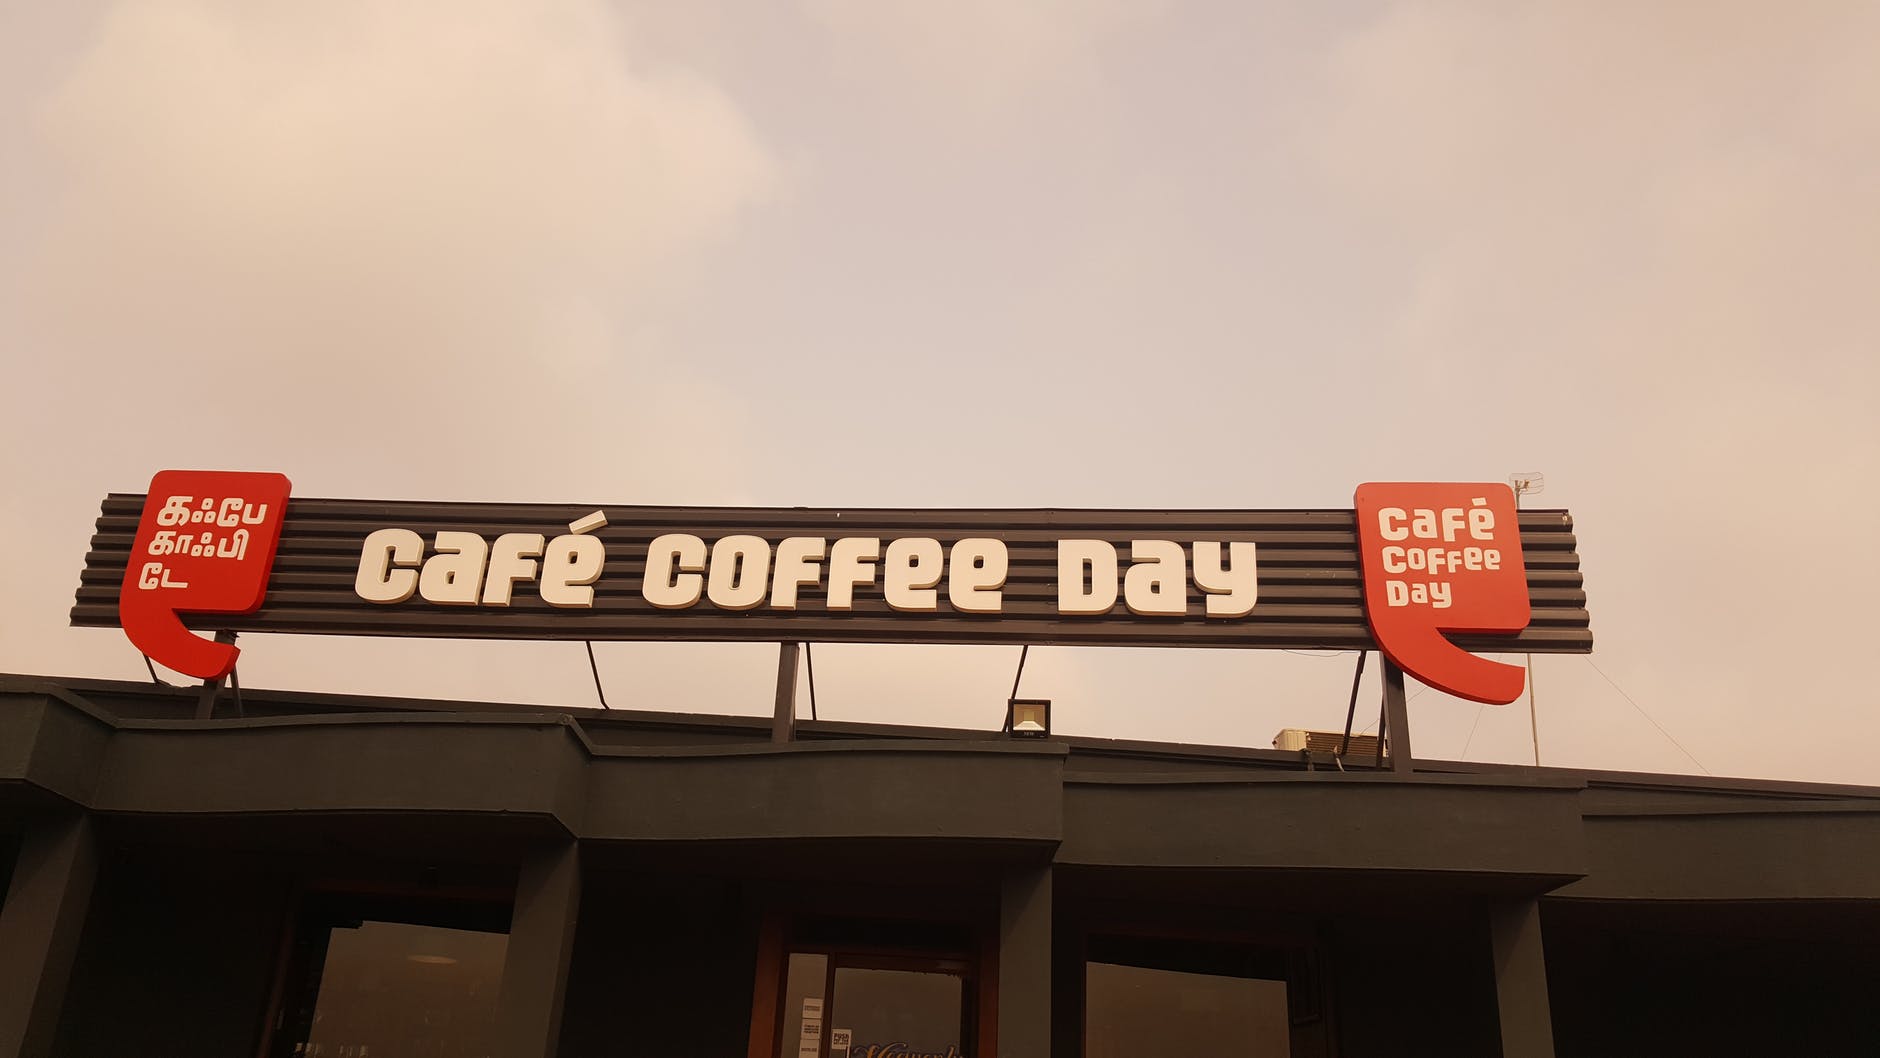 Cafe coffee day - a few thoughts 1